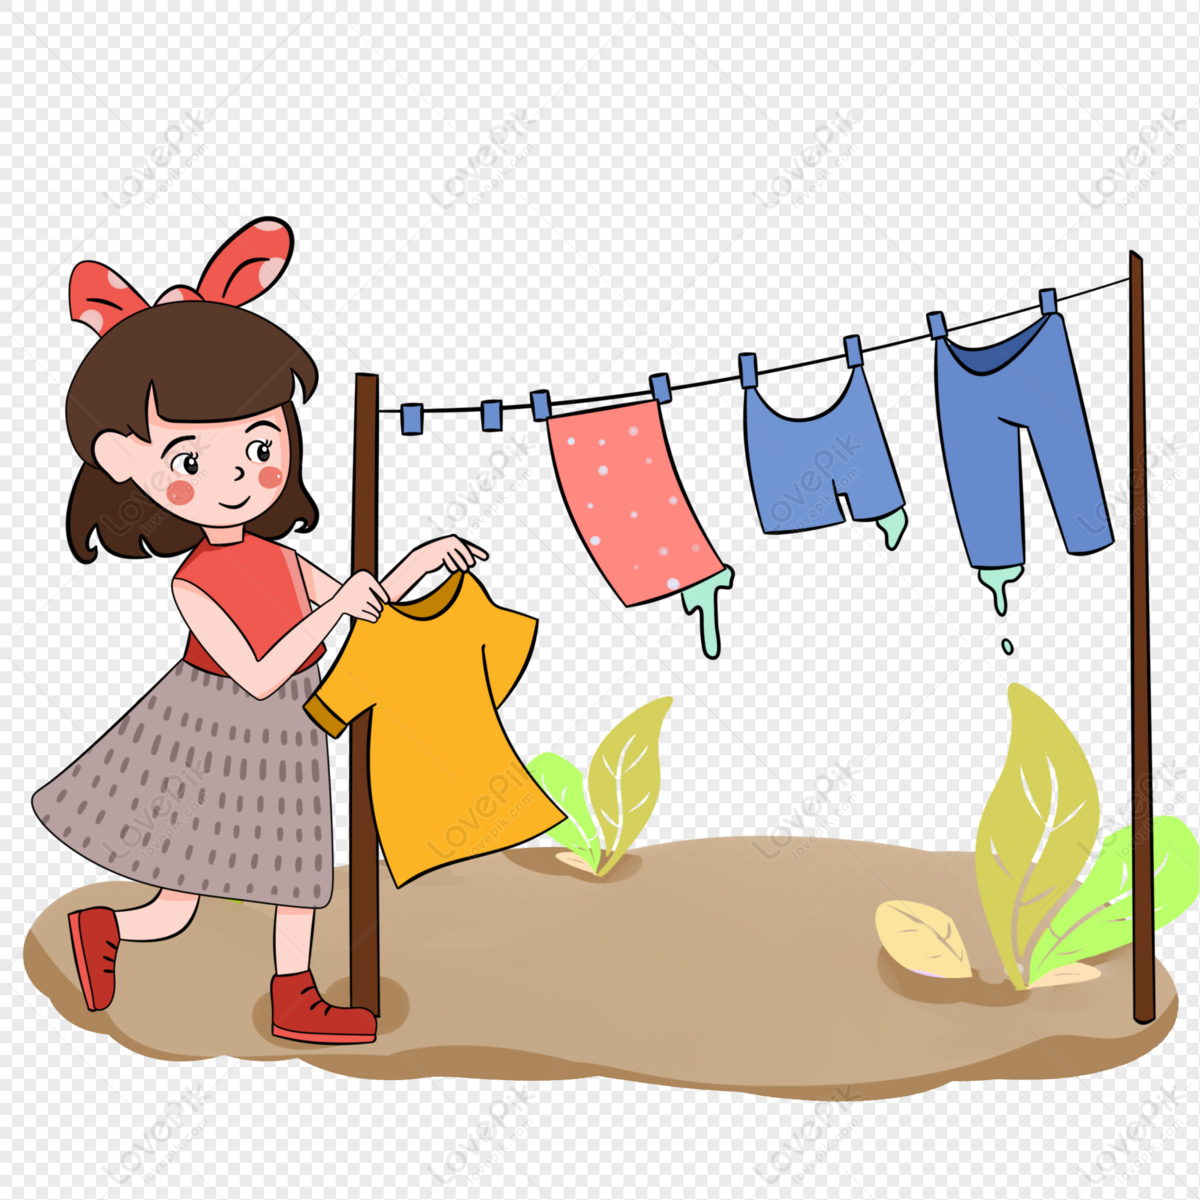 Children Drying Clothes PNG Hd Transparent Image And Clipart Image For